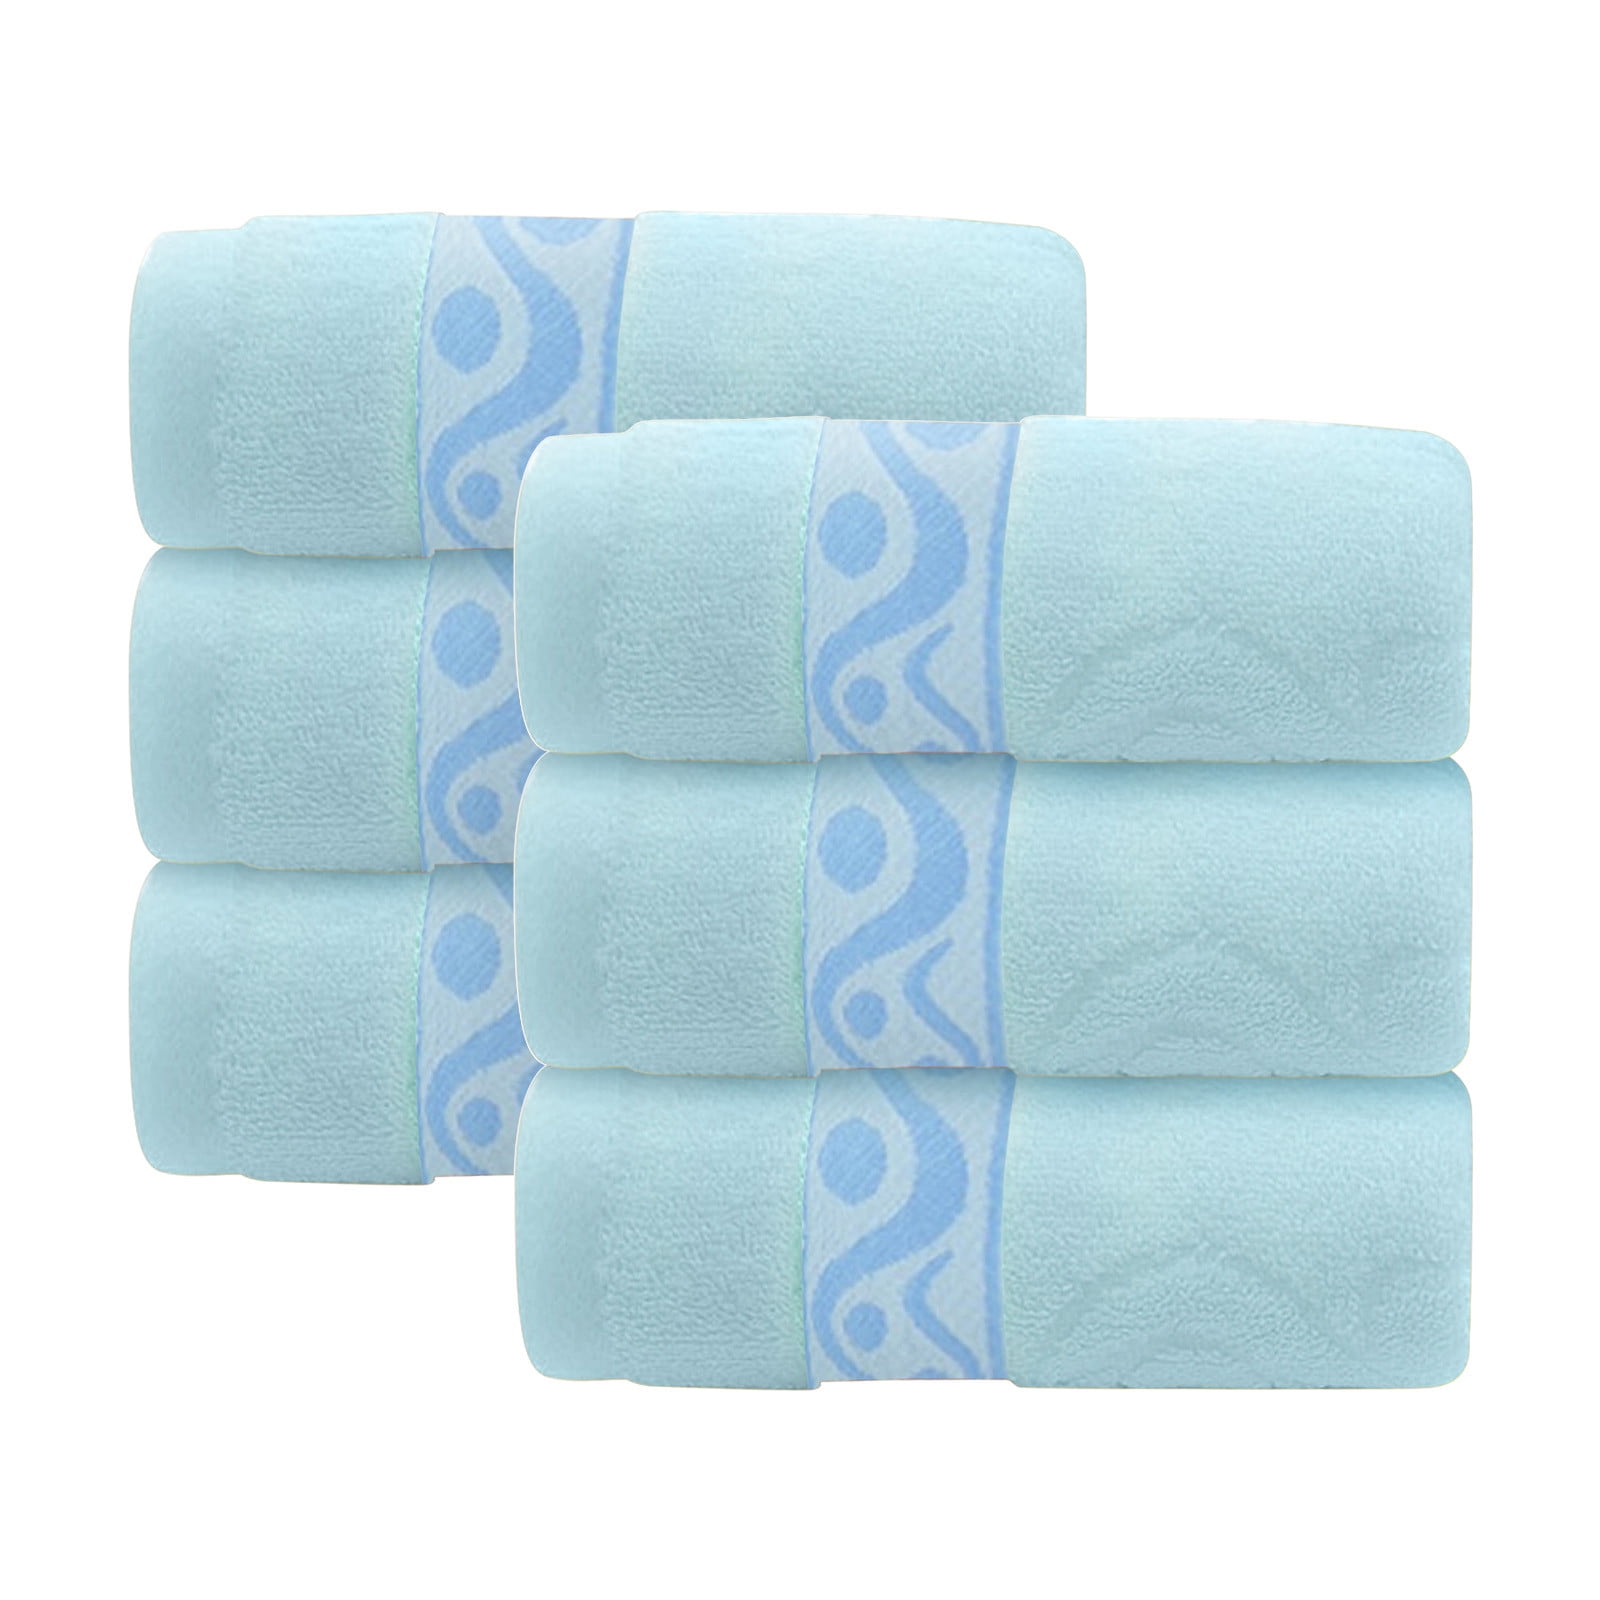 Cotton Bath Towel Set for Bathroom 2 Hand Face Towels 1 Bath Towel for  Adult White Brown Grey Terry Washcloth Travel Sport Towel